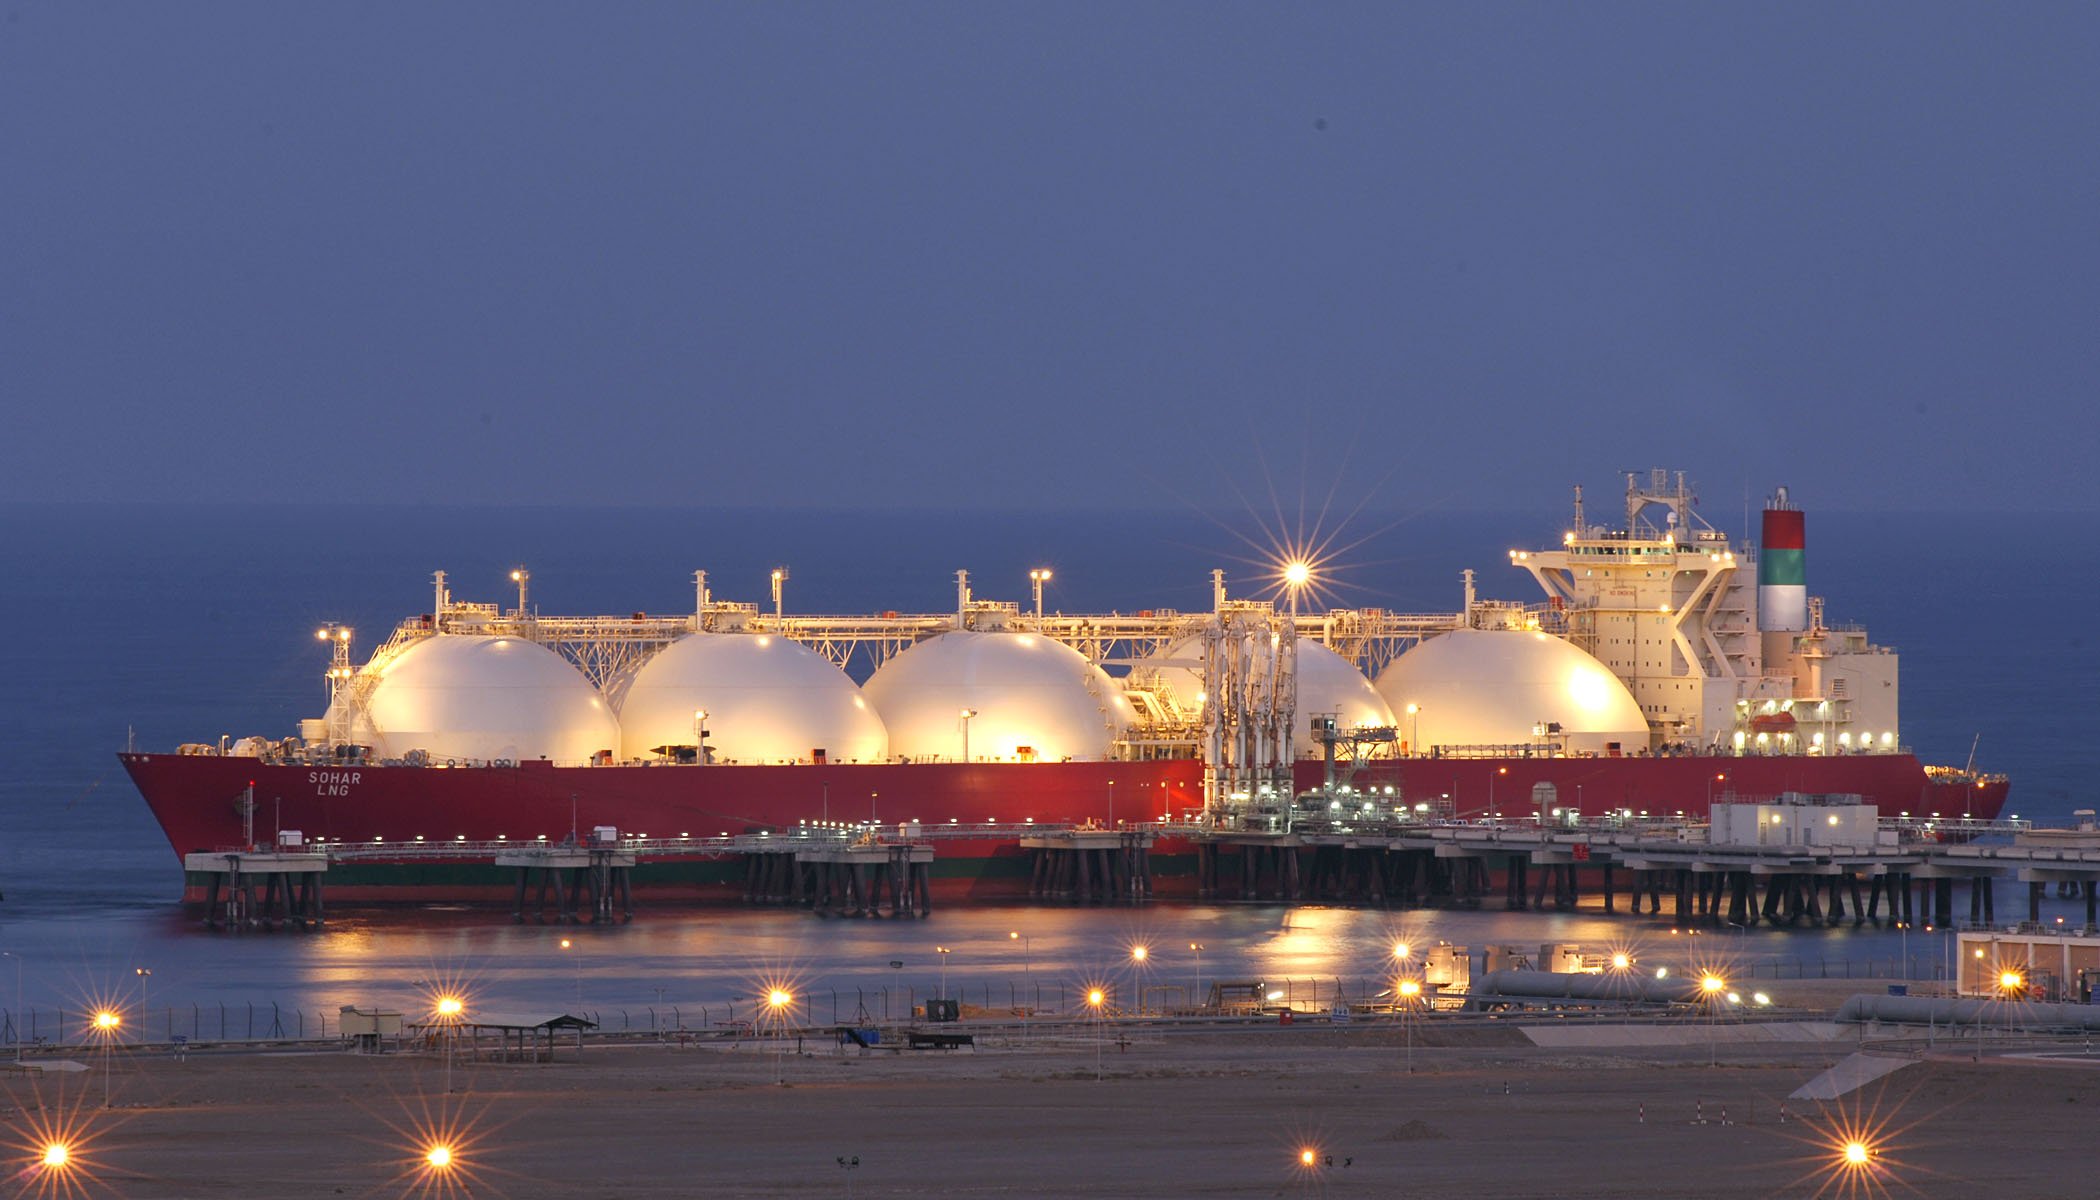 Vitol offers a Green LNG product